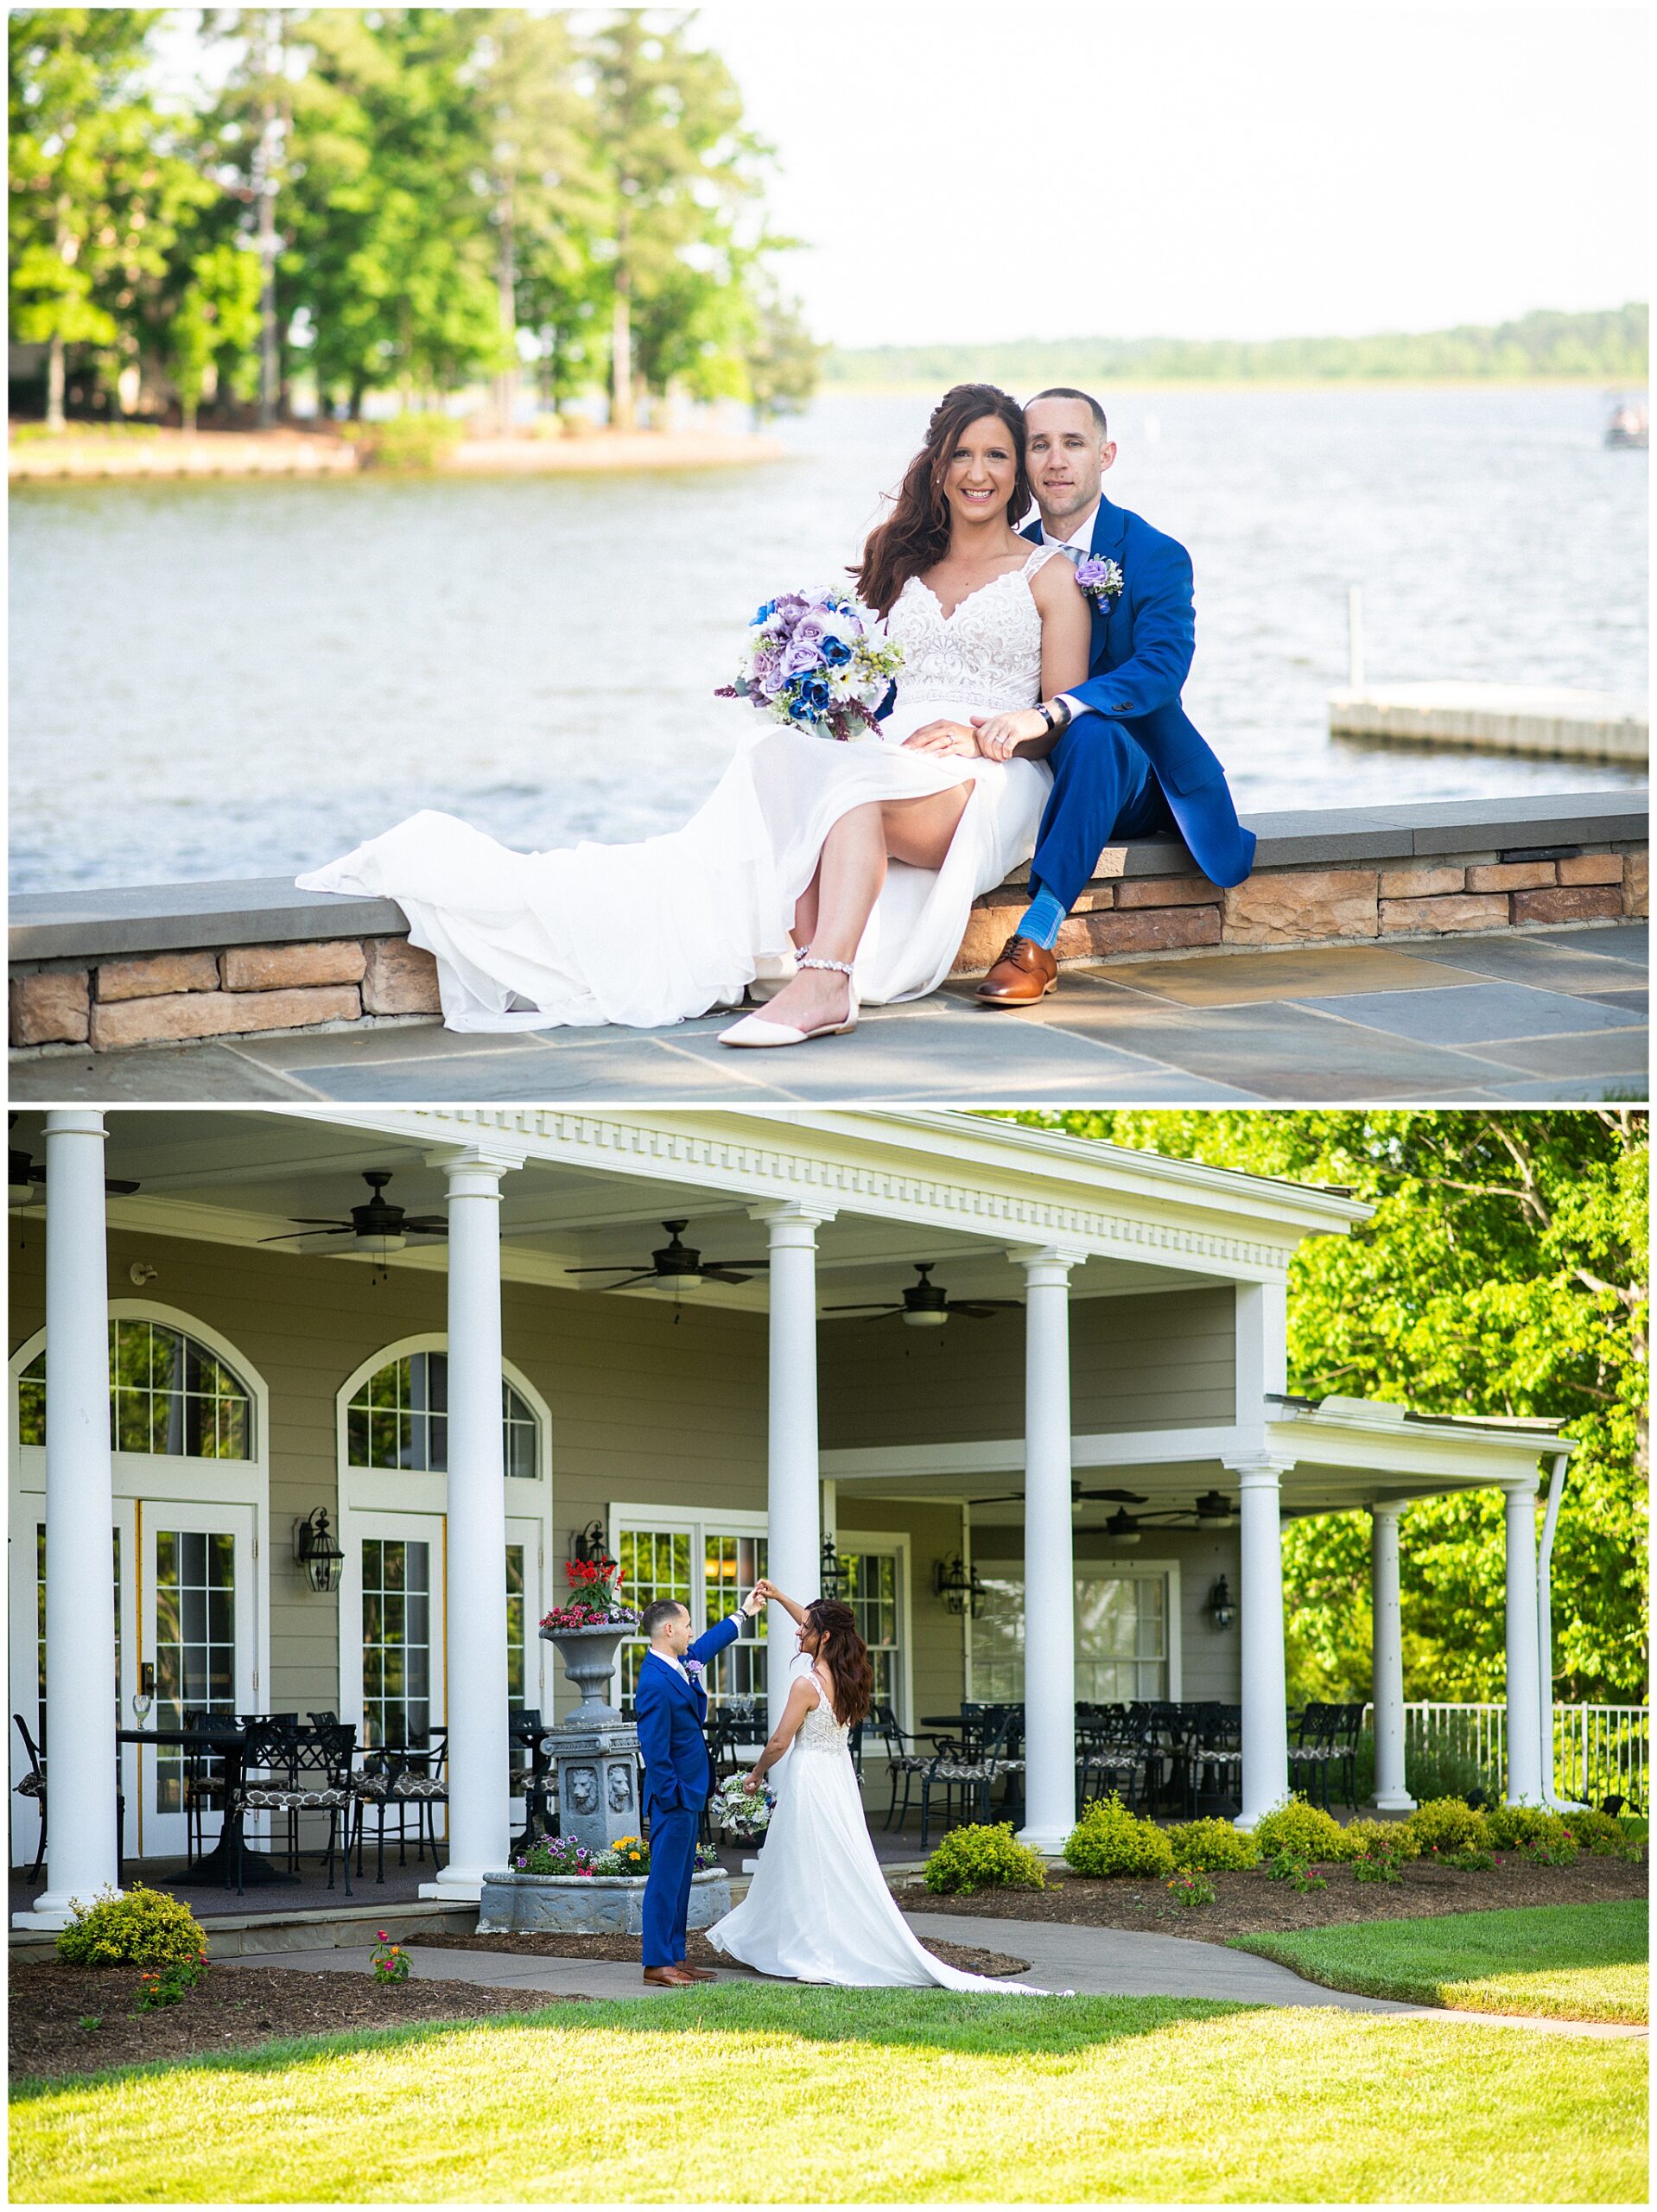 Newlyweds dance in front of a classical colonnade porch on a sidewalk and sit on the edge of a large lake Wedding Venues in Virginia